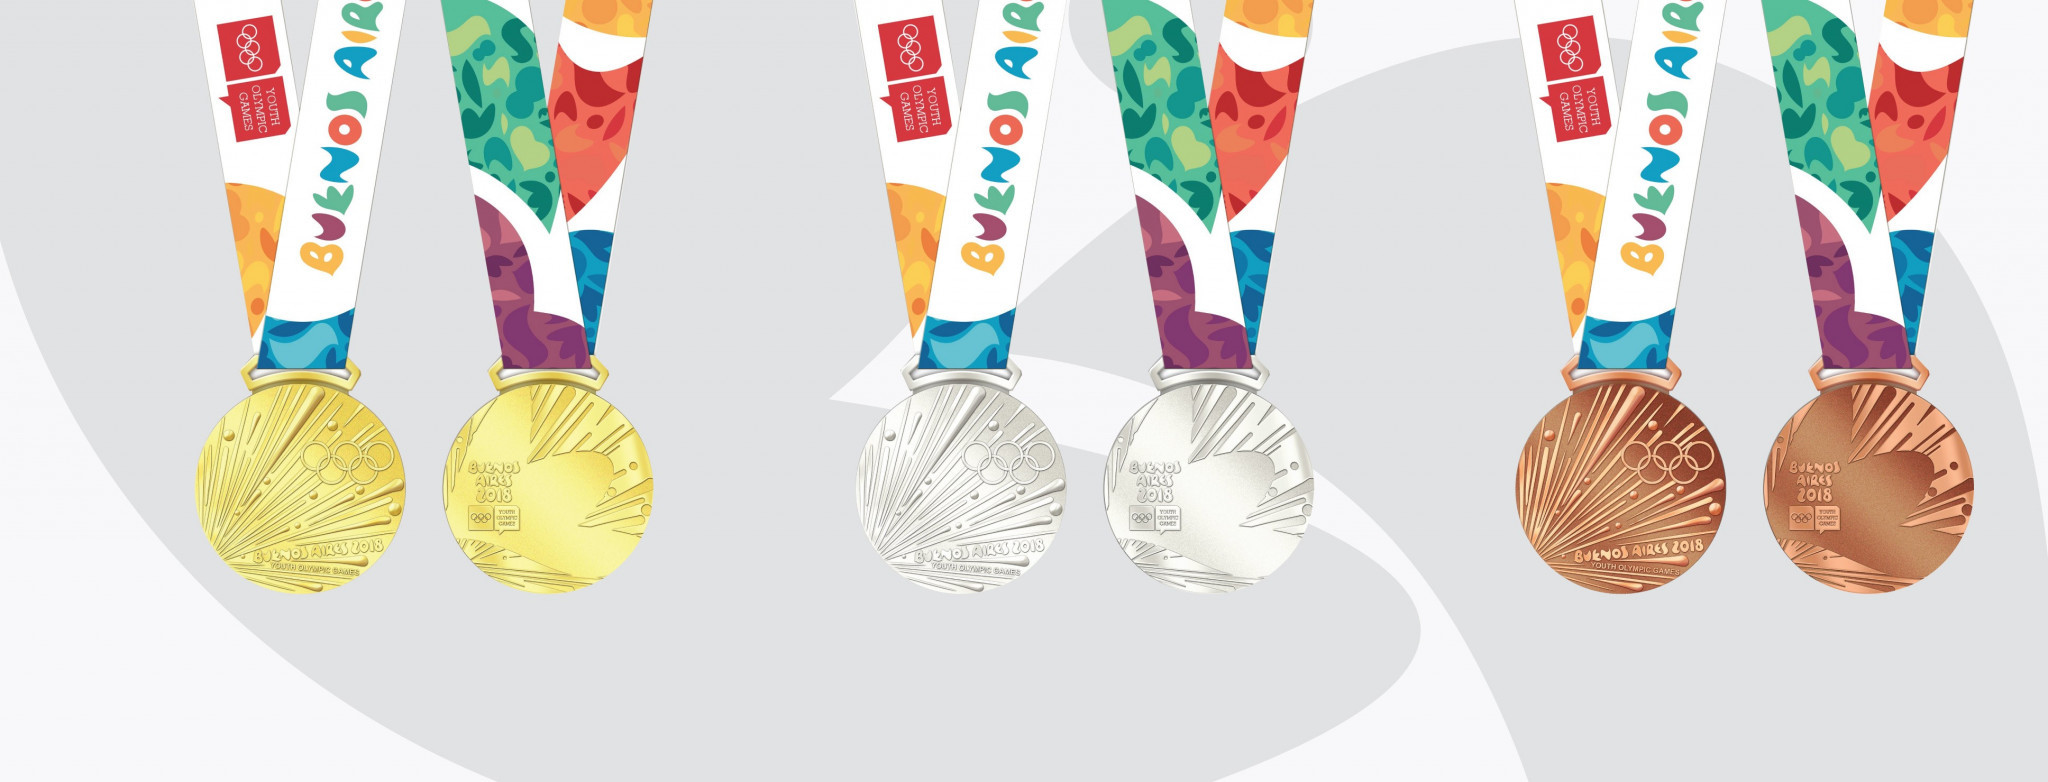 The design of the medals to be awarded at this year's Summer Youth Olympic Games in Buenos Aires is now complete ©Buenos Aires 2018 